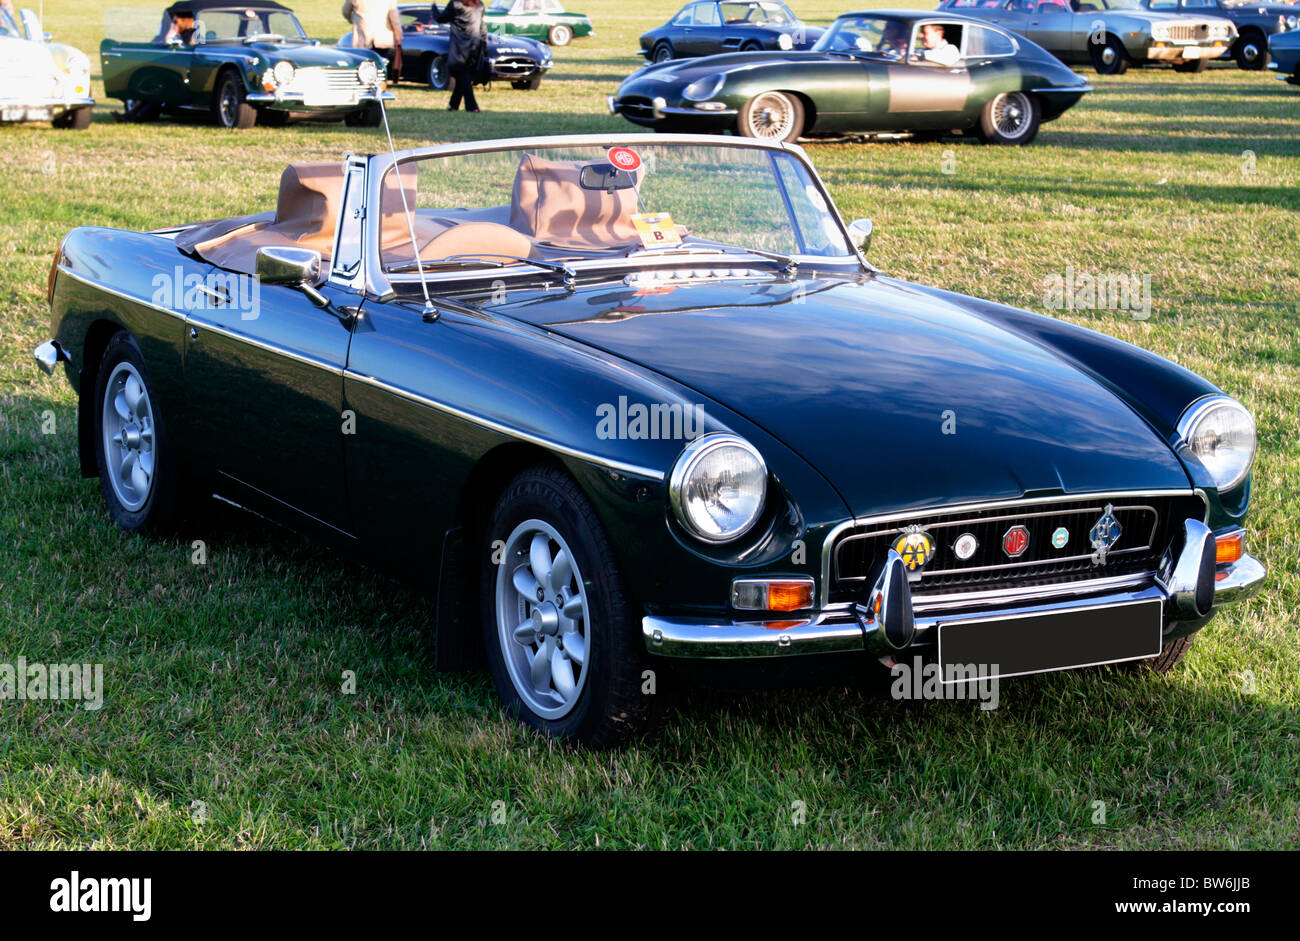 One of the most popular British sports cars, of the 1970's the famous MGB Roadster chrome bumper model. Stock Photo